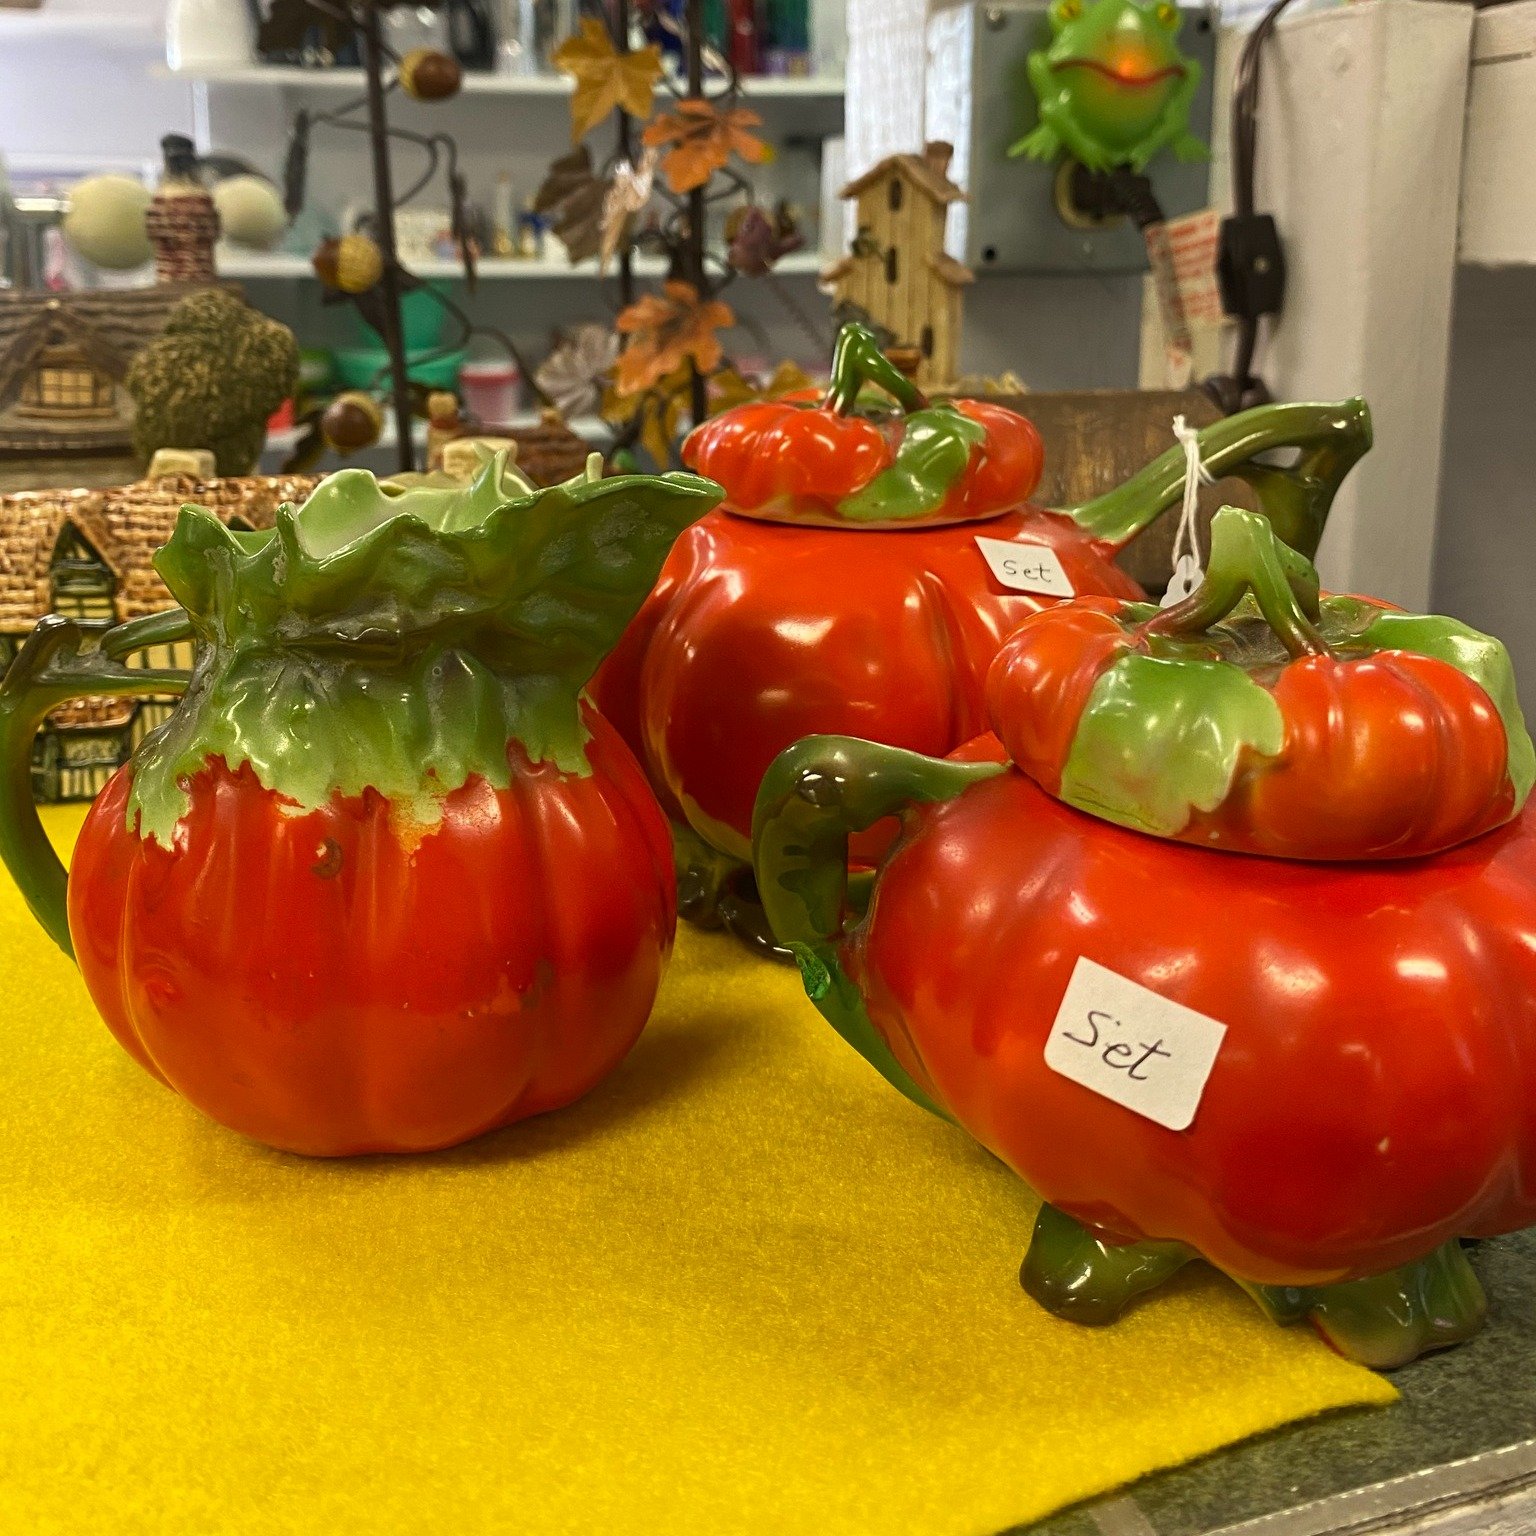 Fav Find Friday: this LEGENDARY tomato kitchen set 🍅 tag us in your story with your favorite find to be featured! #tomatogirl #thrifting #thriftingdiy #upcycling #thriftflip #vintageshop #secondhandshop #sustainabilitymatters #thriftedfinds #secondh